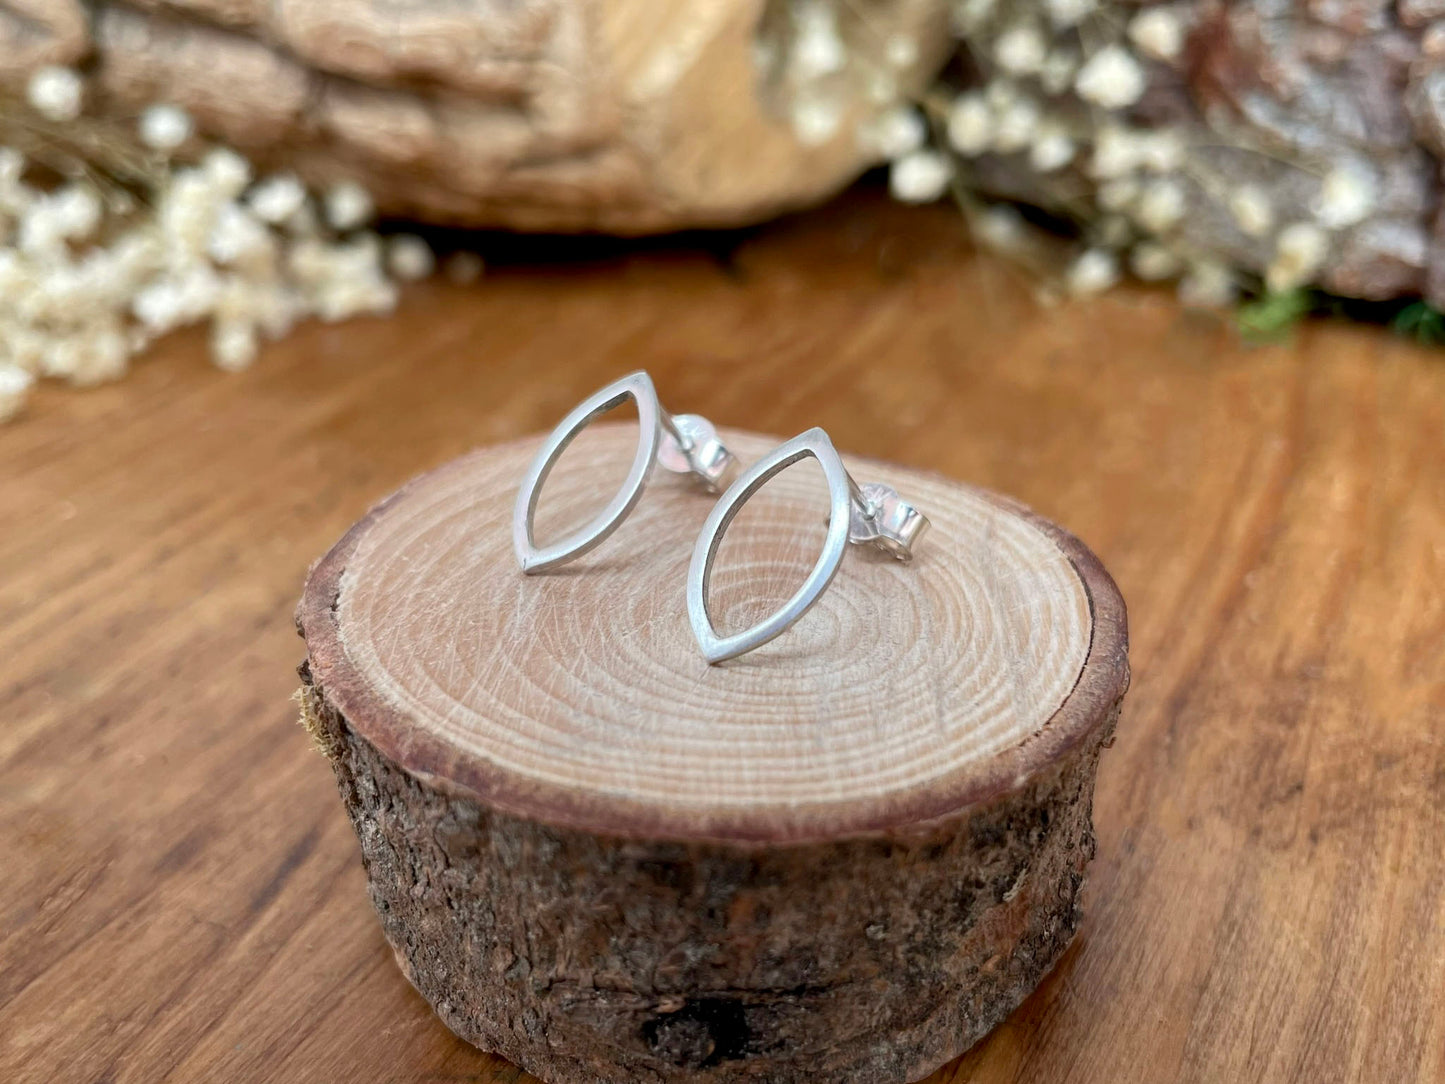 Silver Navette Stud Earrings by Curious Magpie Jewellery